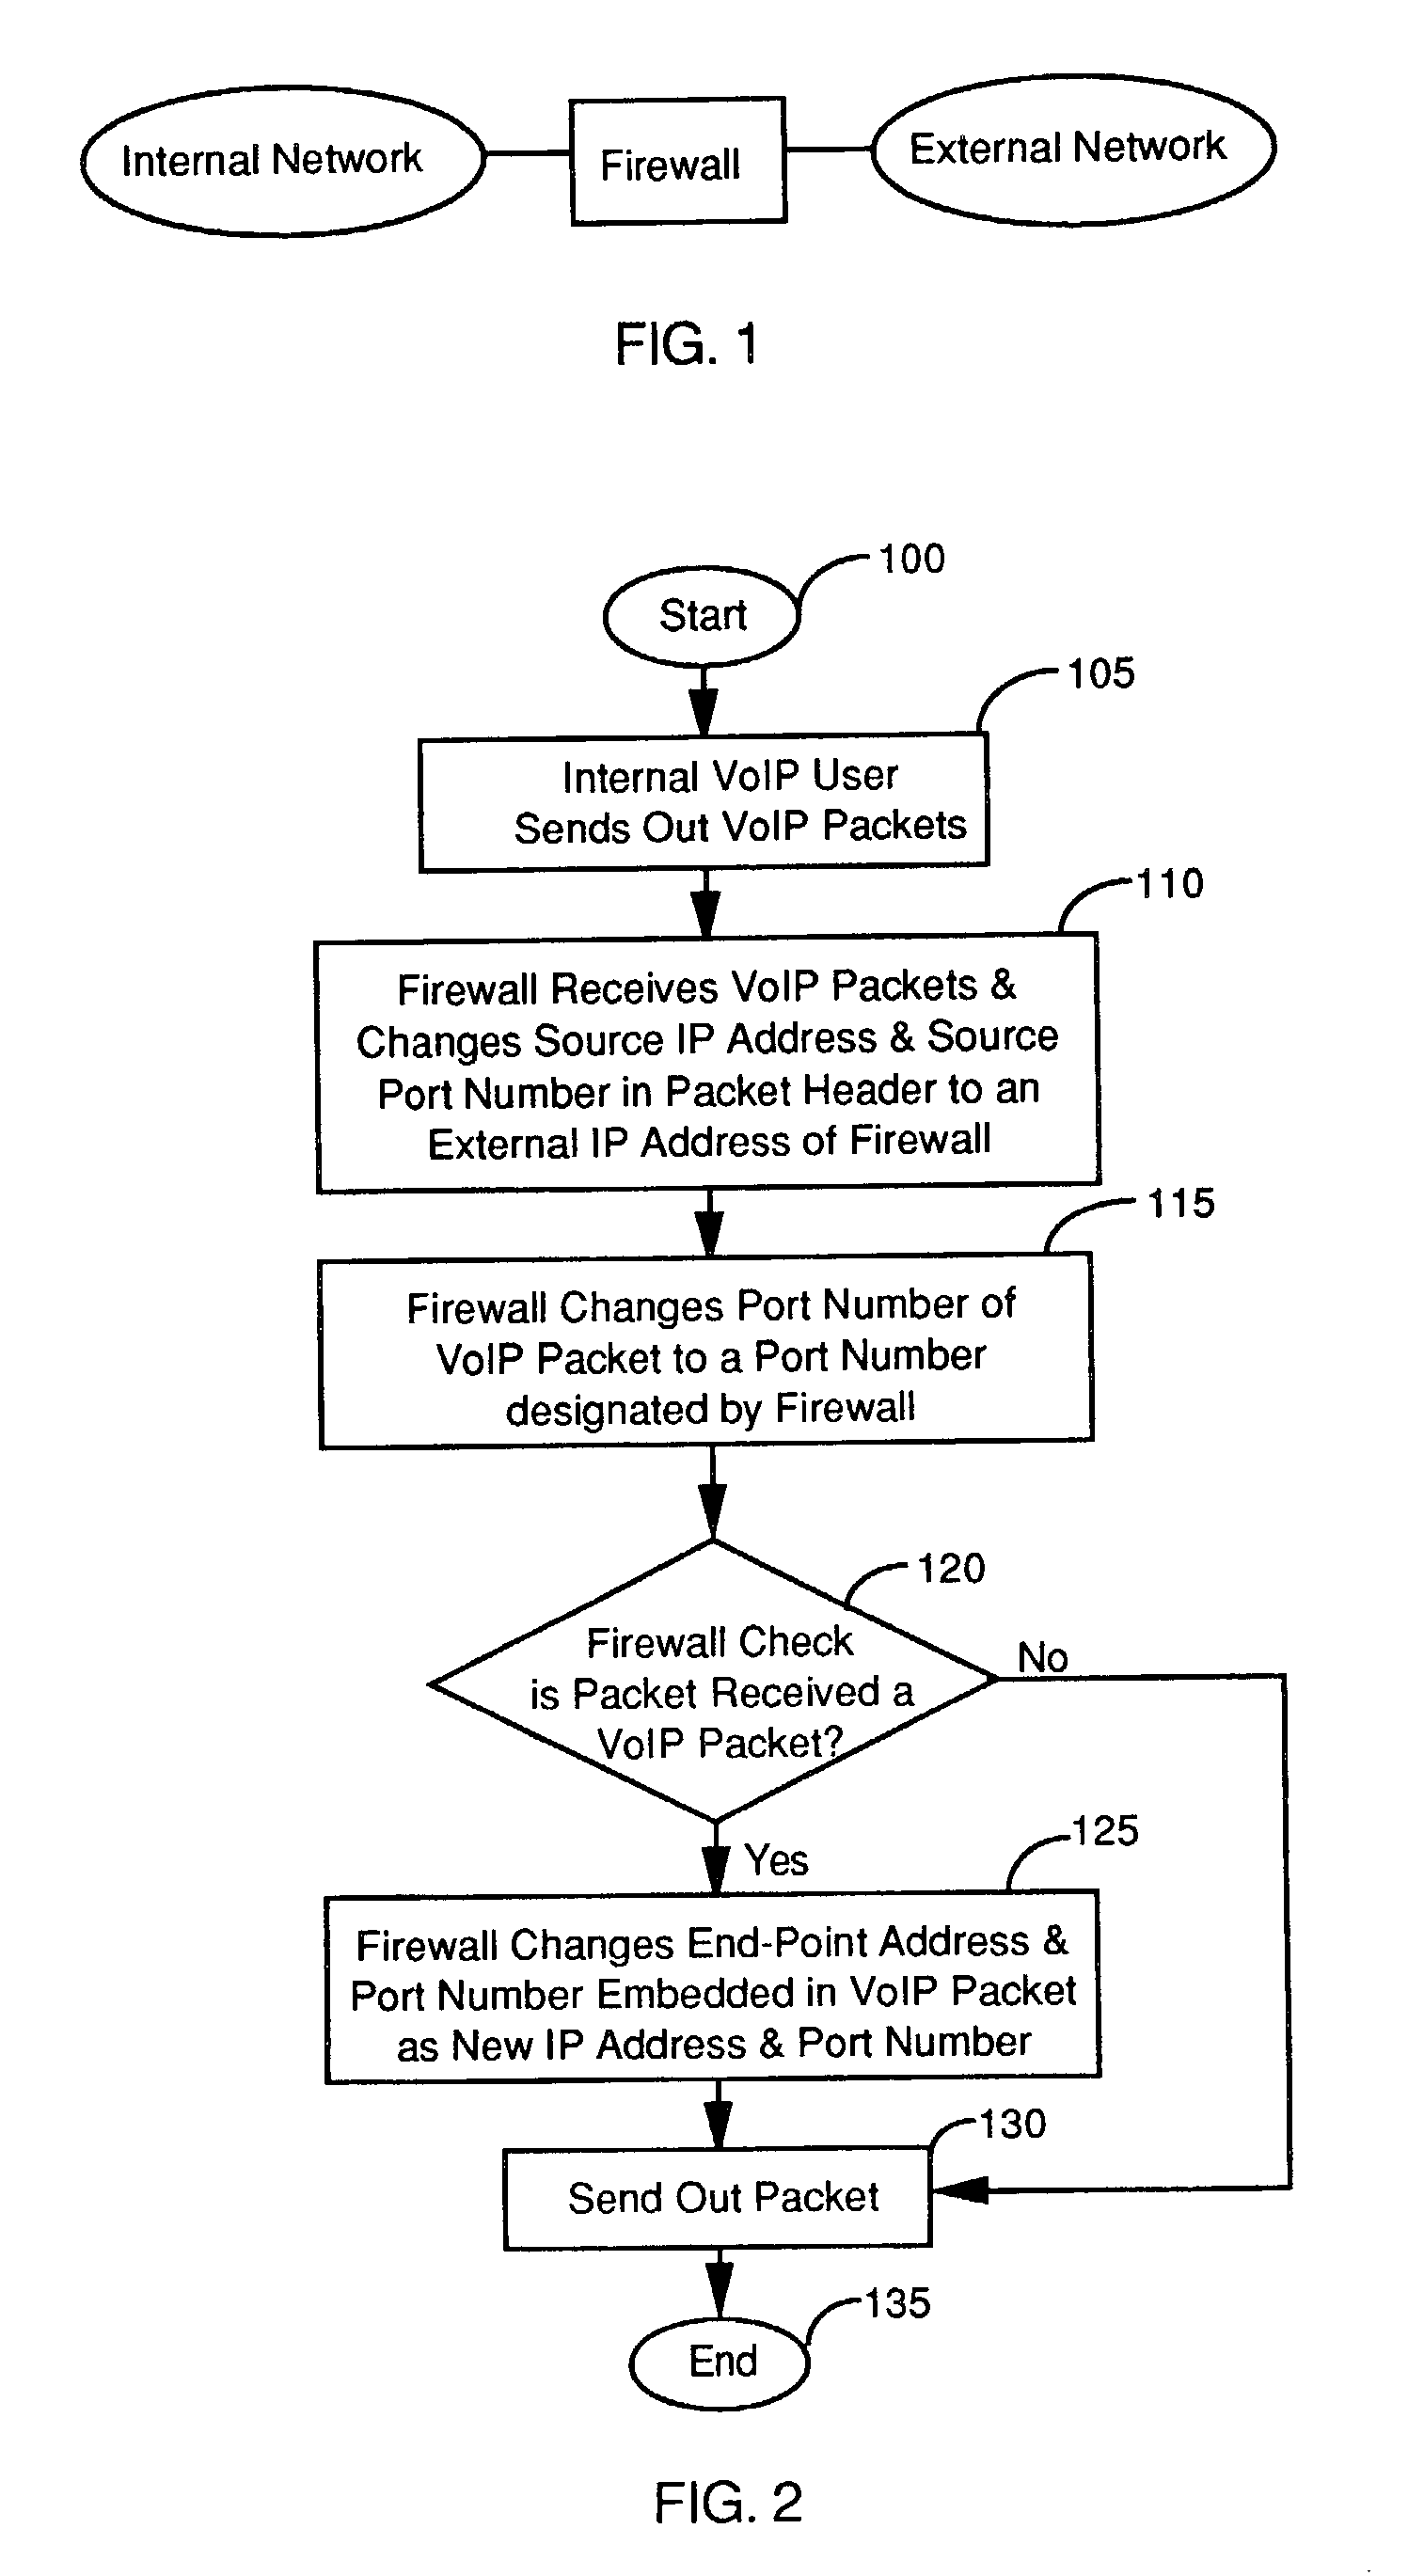 Firewall interface configuration and processes to enable bi-directional VoIP traversal communications